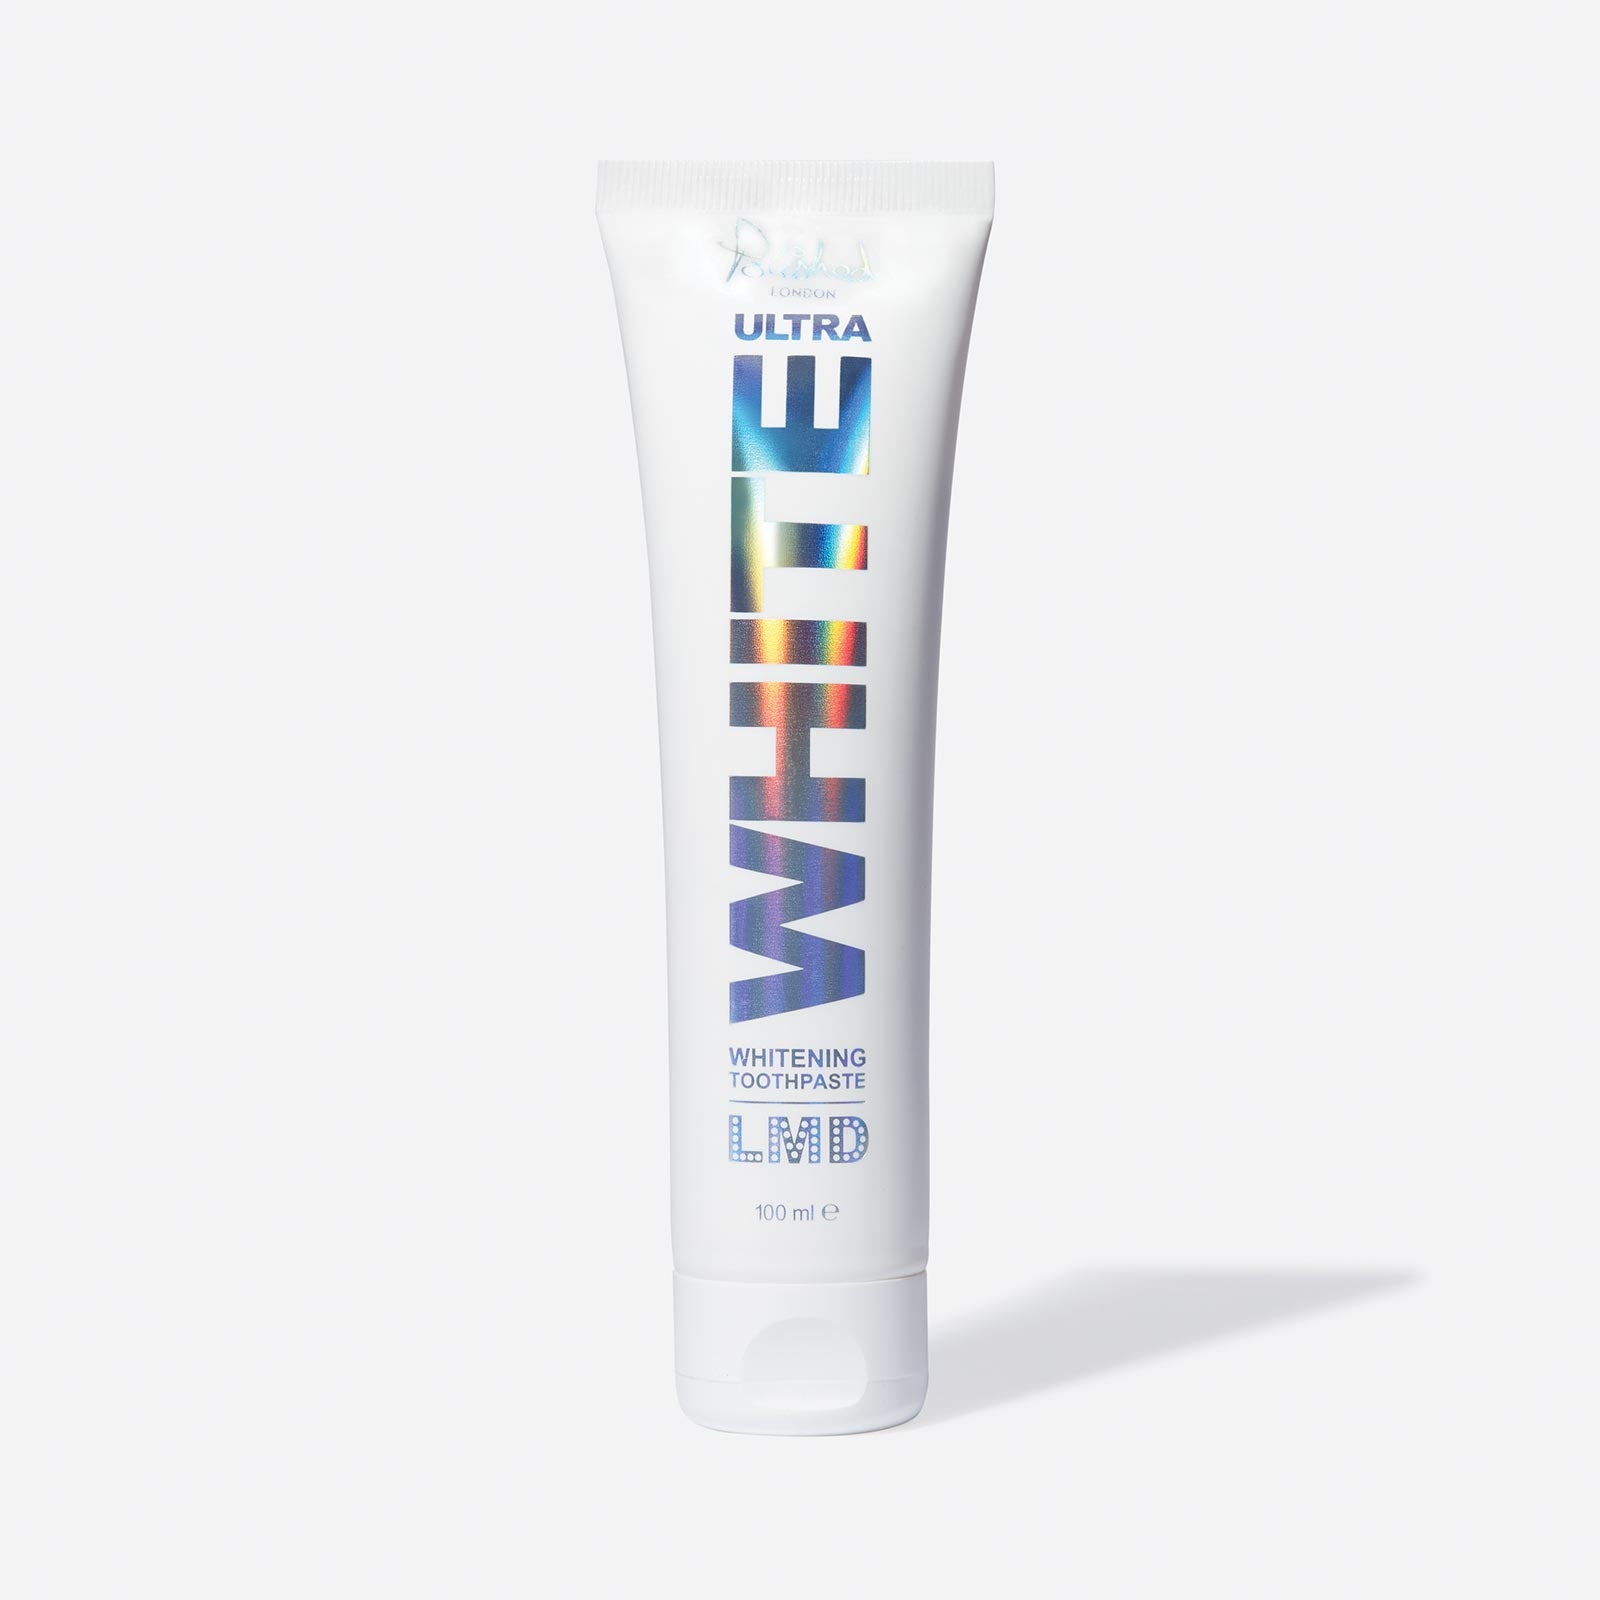 The Best Teeth Whitening Toothpaste by Polished London